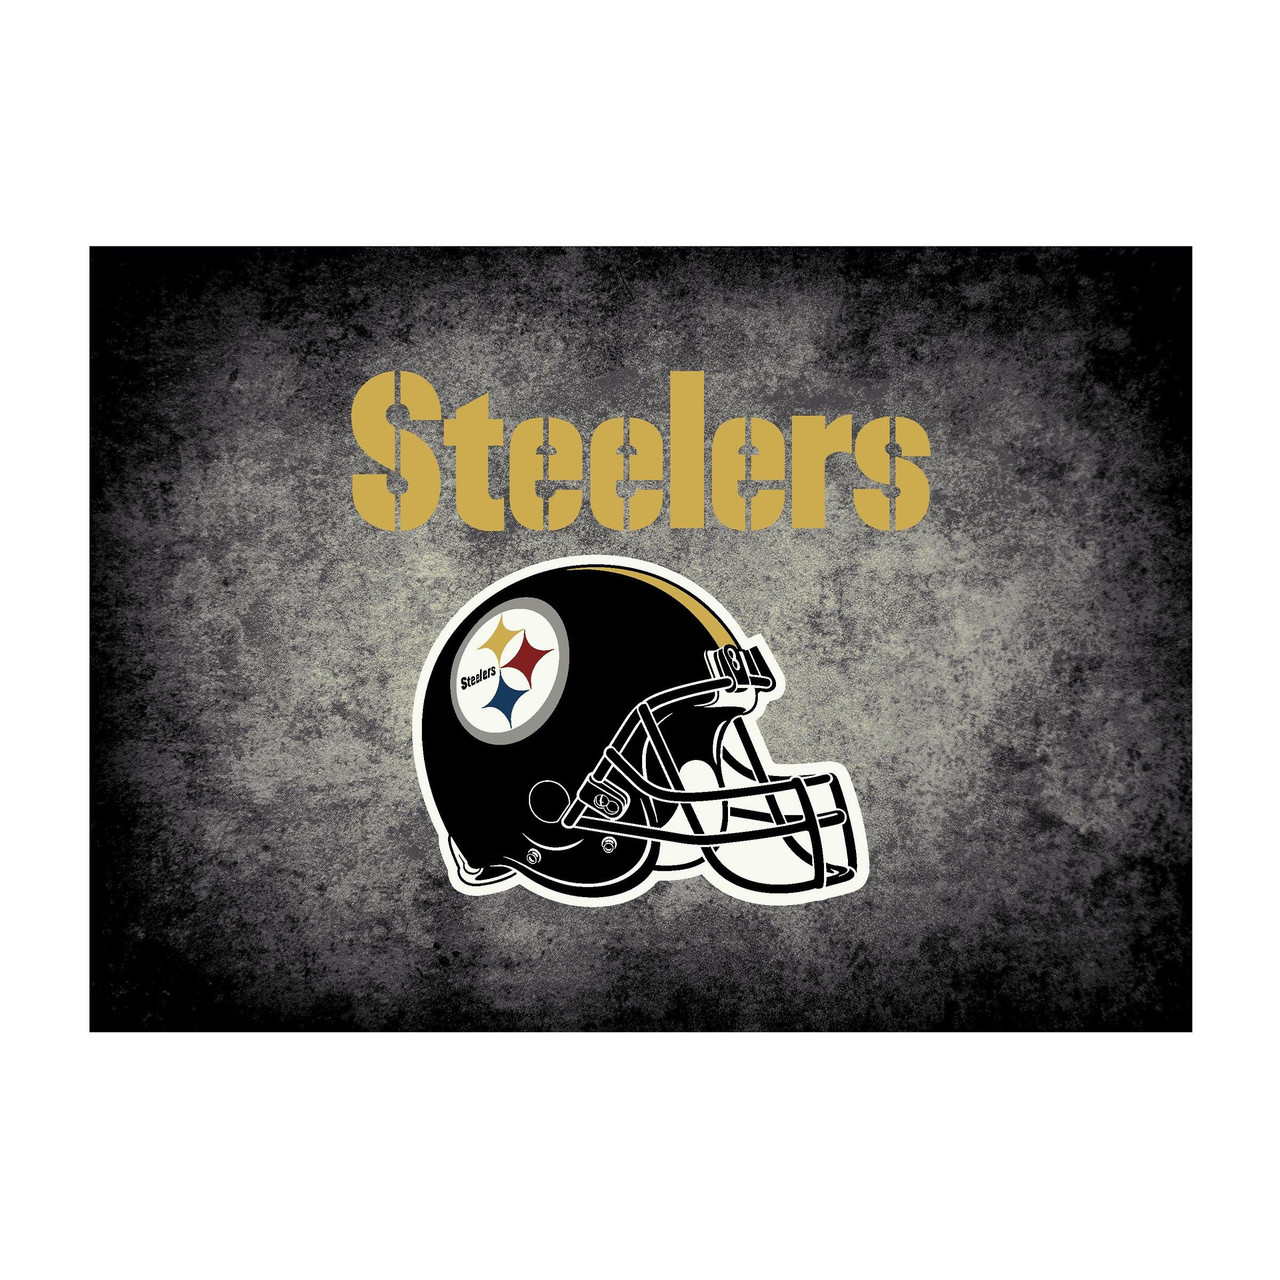 526-5004. Pittsburgh, Pit, Steelers,6'X8', Distressed, Rug, GB, NFL, Imperial